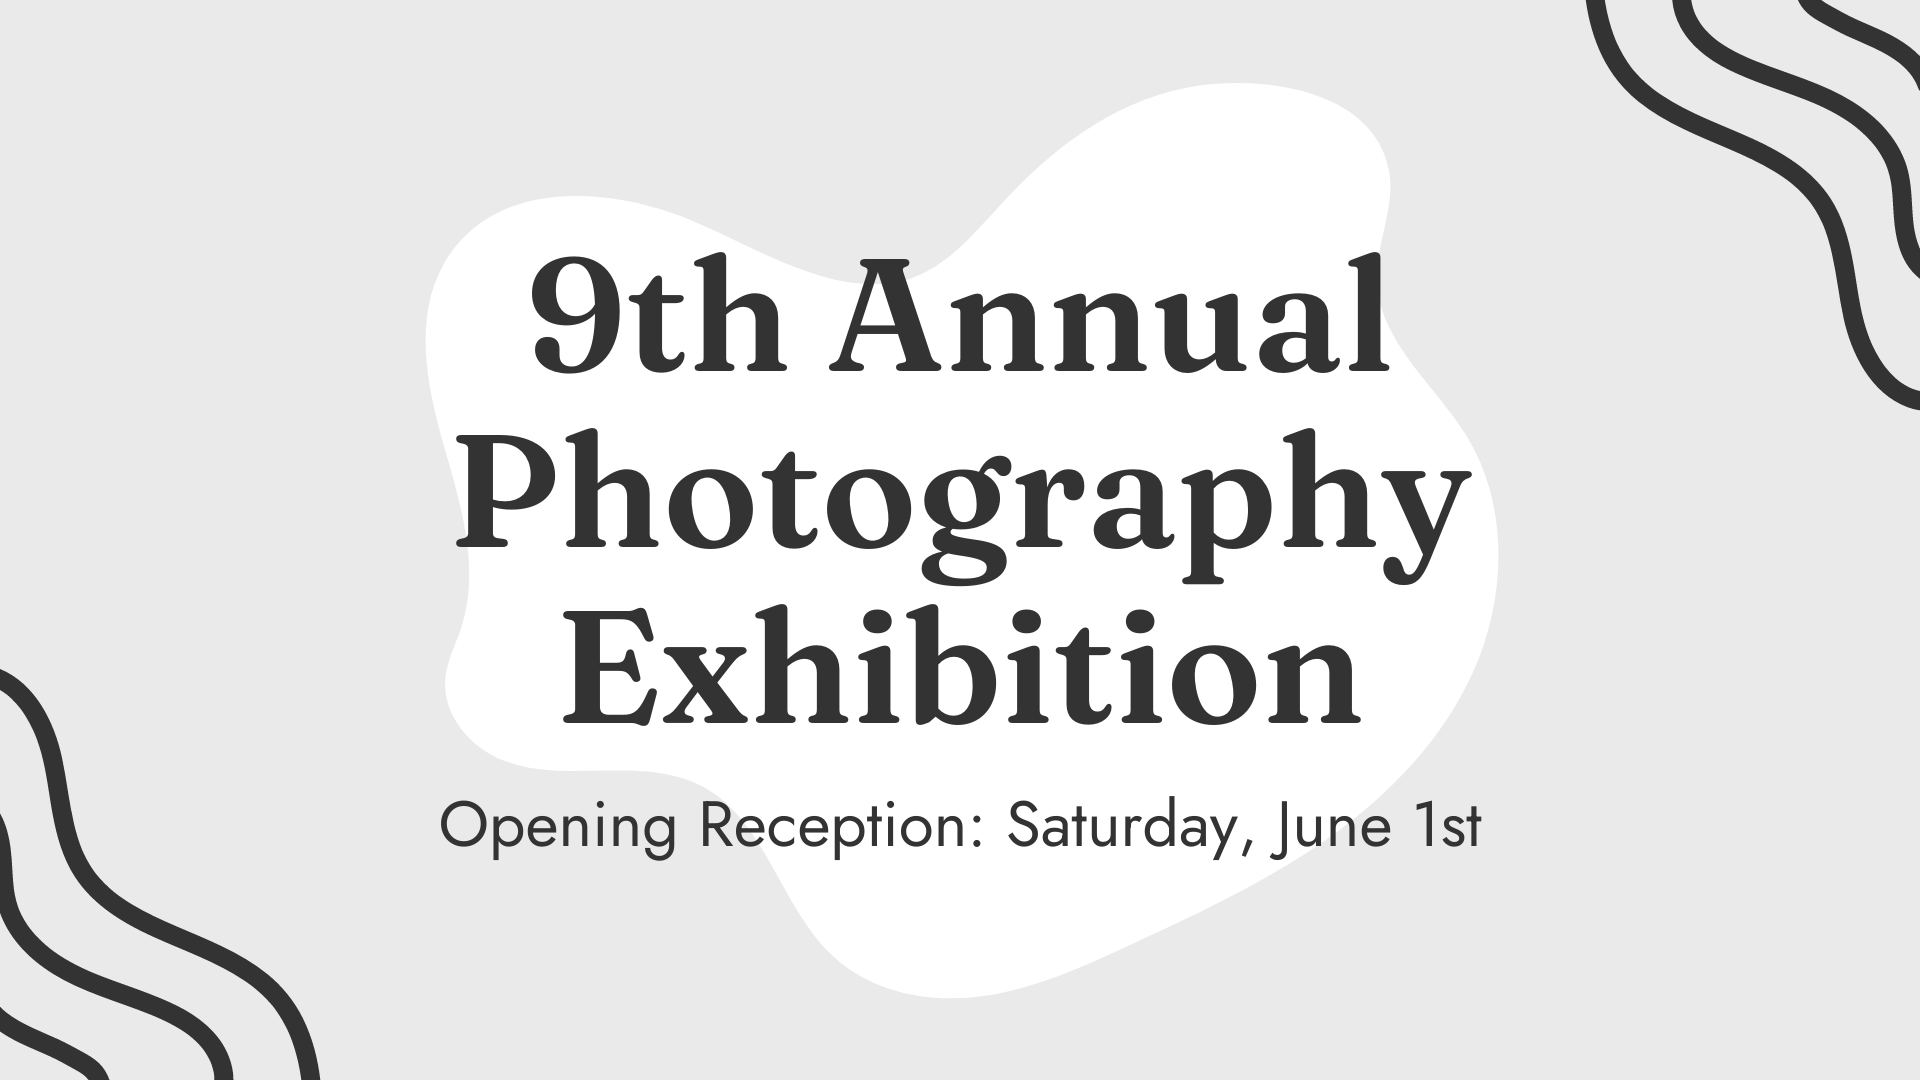 9th Annual Photography Exhibition